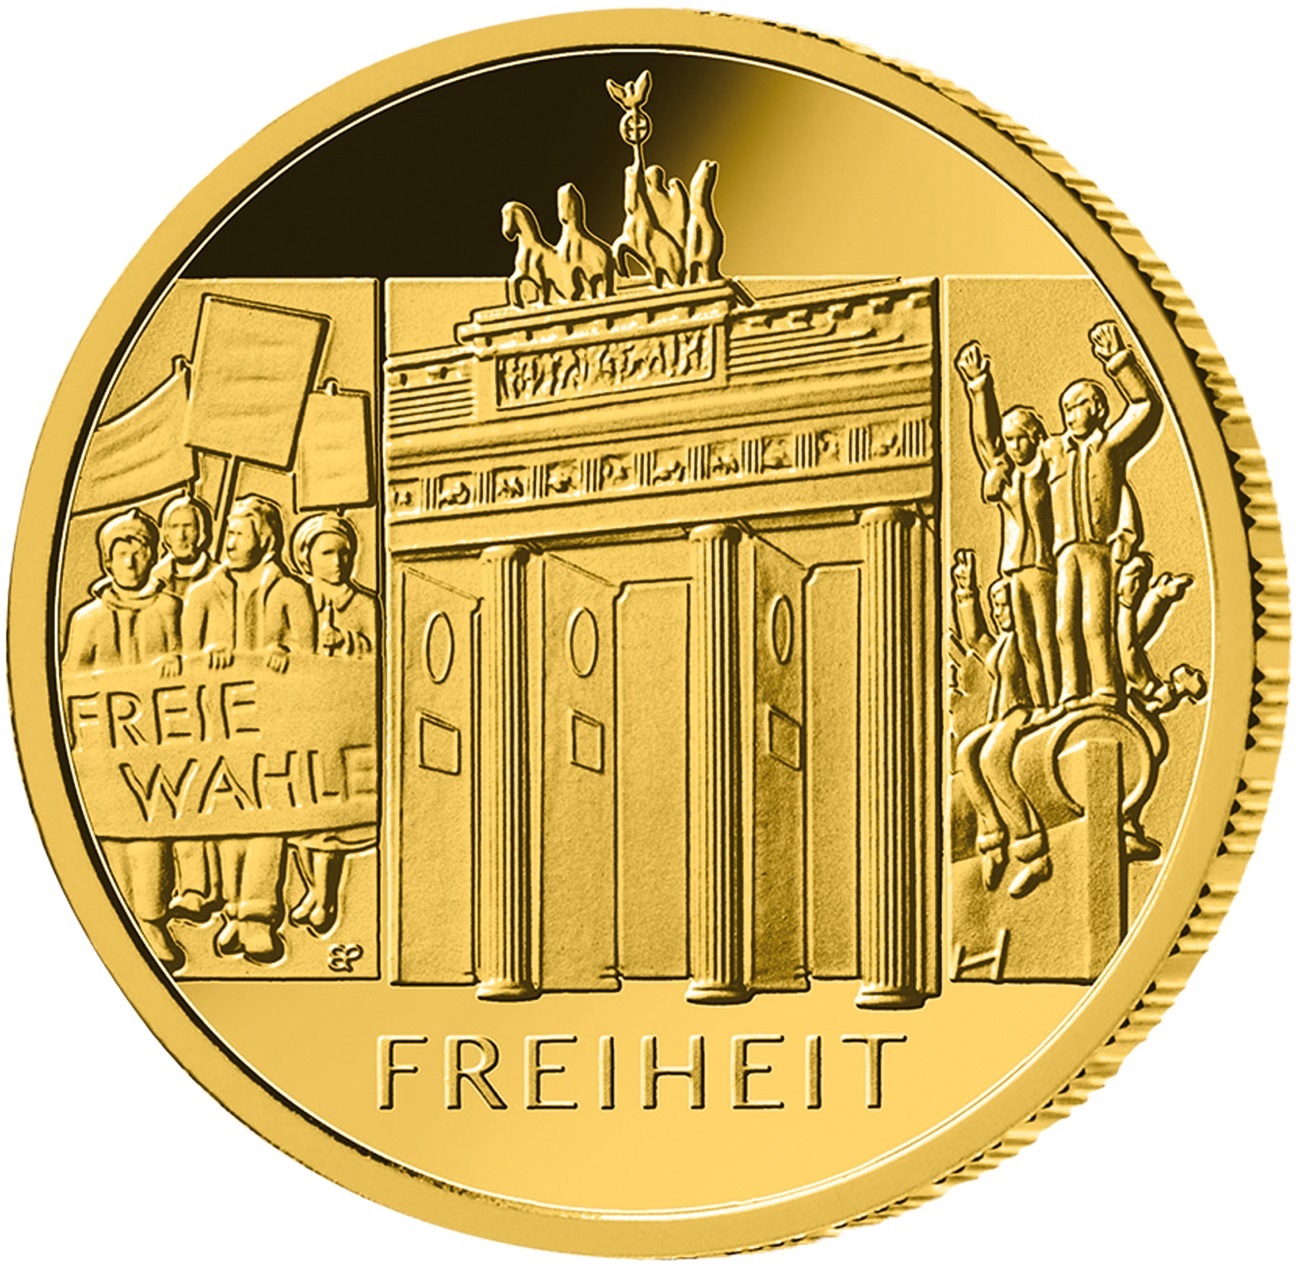 (EUR03.Proof.2022.SGM2201M41S5) 100 euro Germany 2022 A BU gold - Liberty Reverse (zoom)